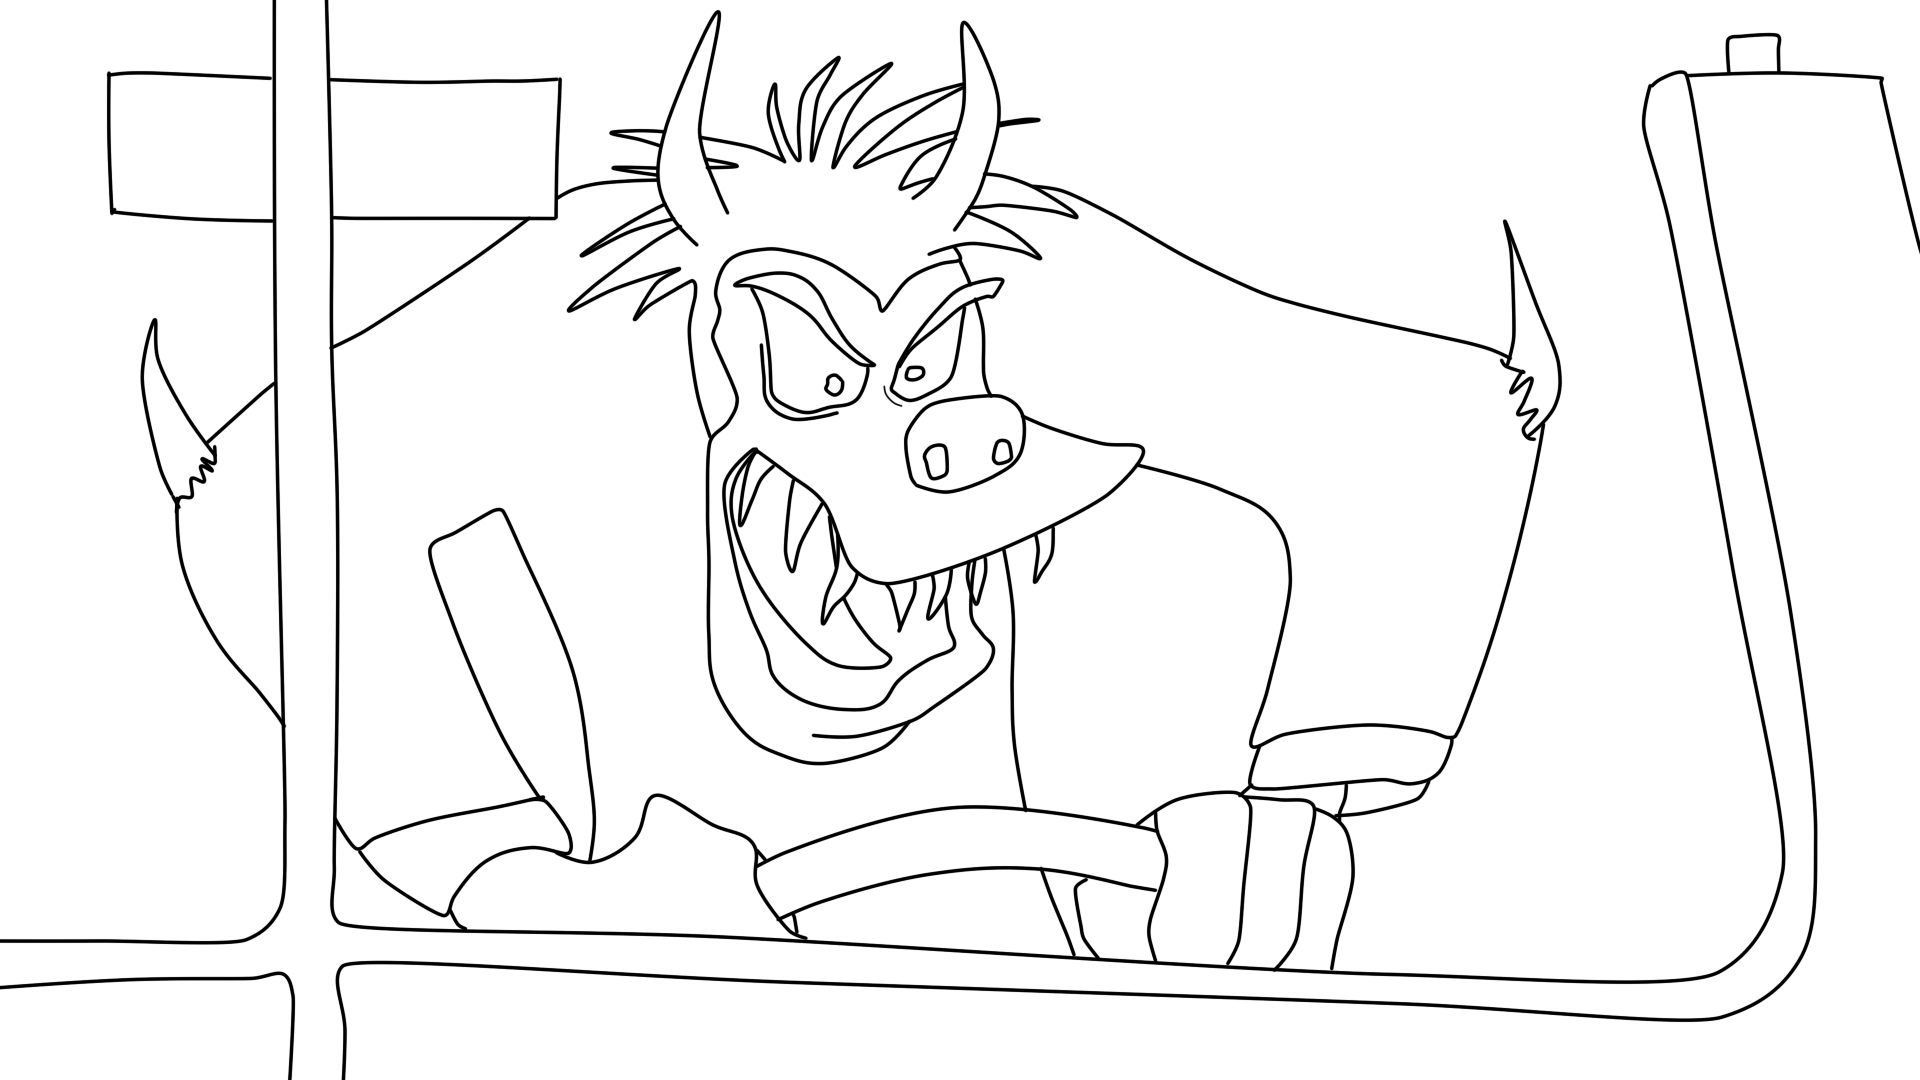 Mr. Wheeler
Traced from screenshot of "Mr. Wheeler," Goofy in Motor Mania, personifying the demon he becomes when driving. They showed this cartoon in a defensive driving course I took many years ago. Yes, I added arm spikes and devil horns because I wanted to, that's why.
Keywords: goofy evil demon demonic mr wheeler